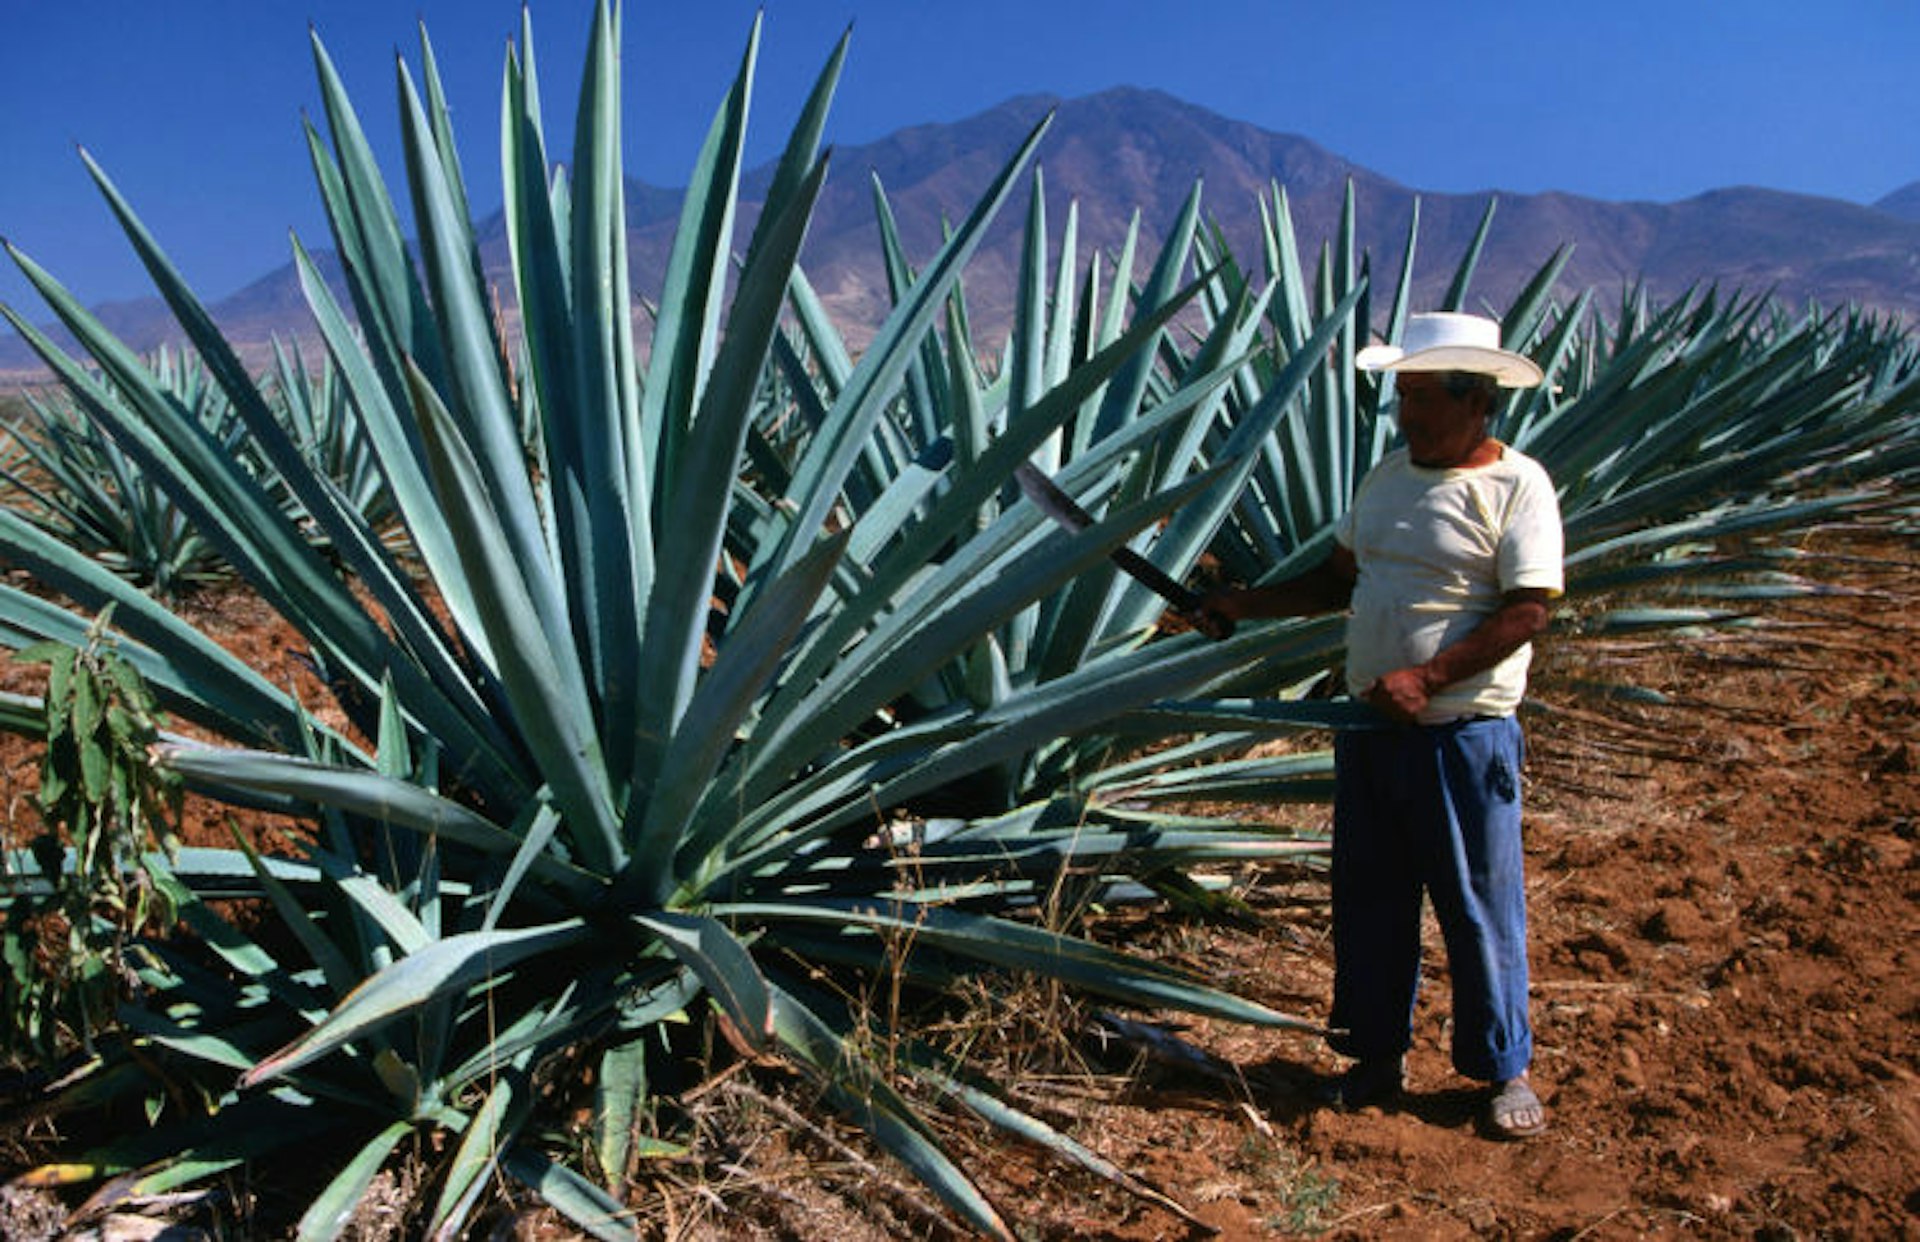 The agave plant produces tequila. mezcal and pulque. Image by Greg Elms / Lonely Planet Images / Getty Images